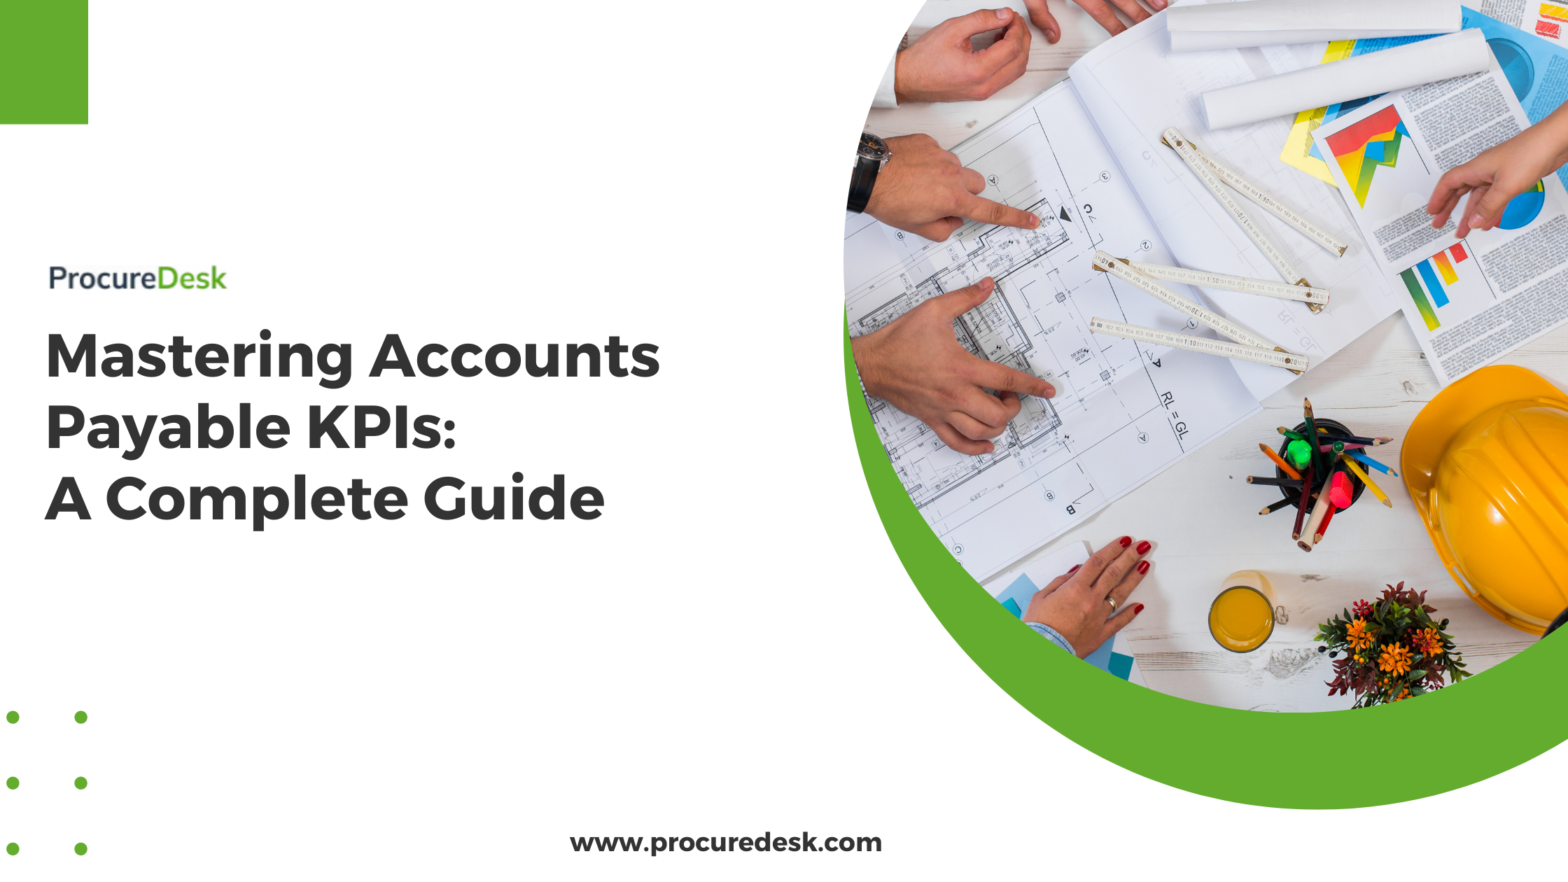 Mastering Accounts Payable KPIs: A Complete Guide